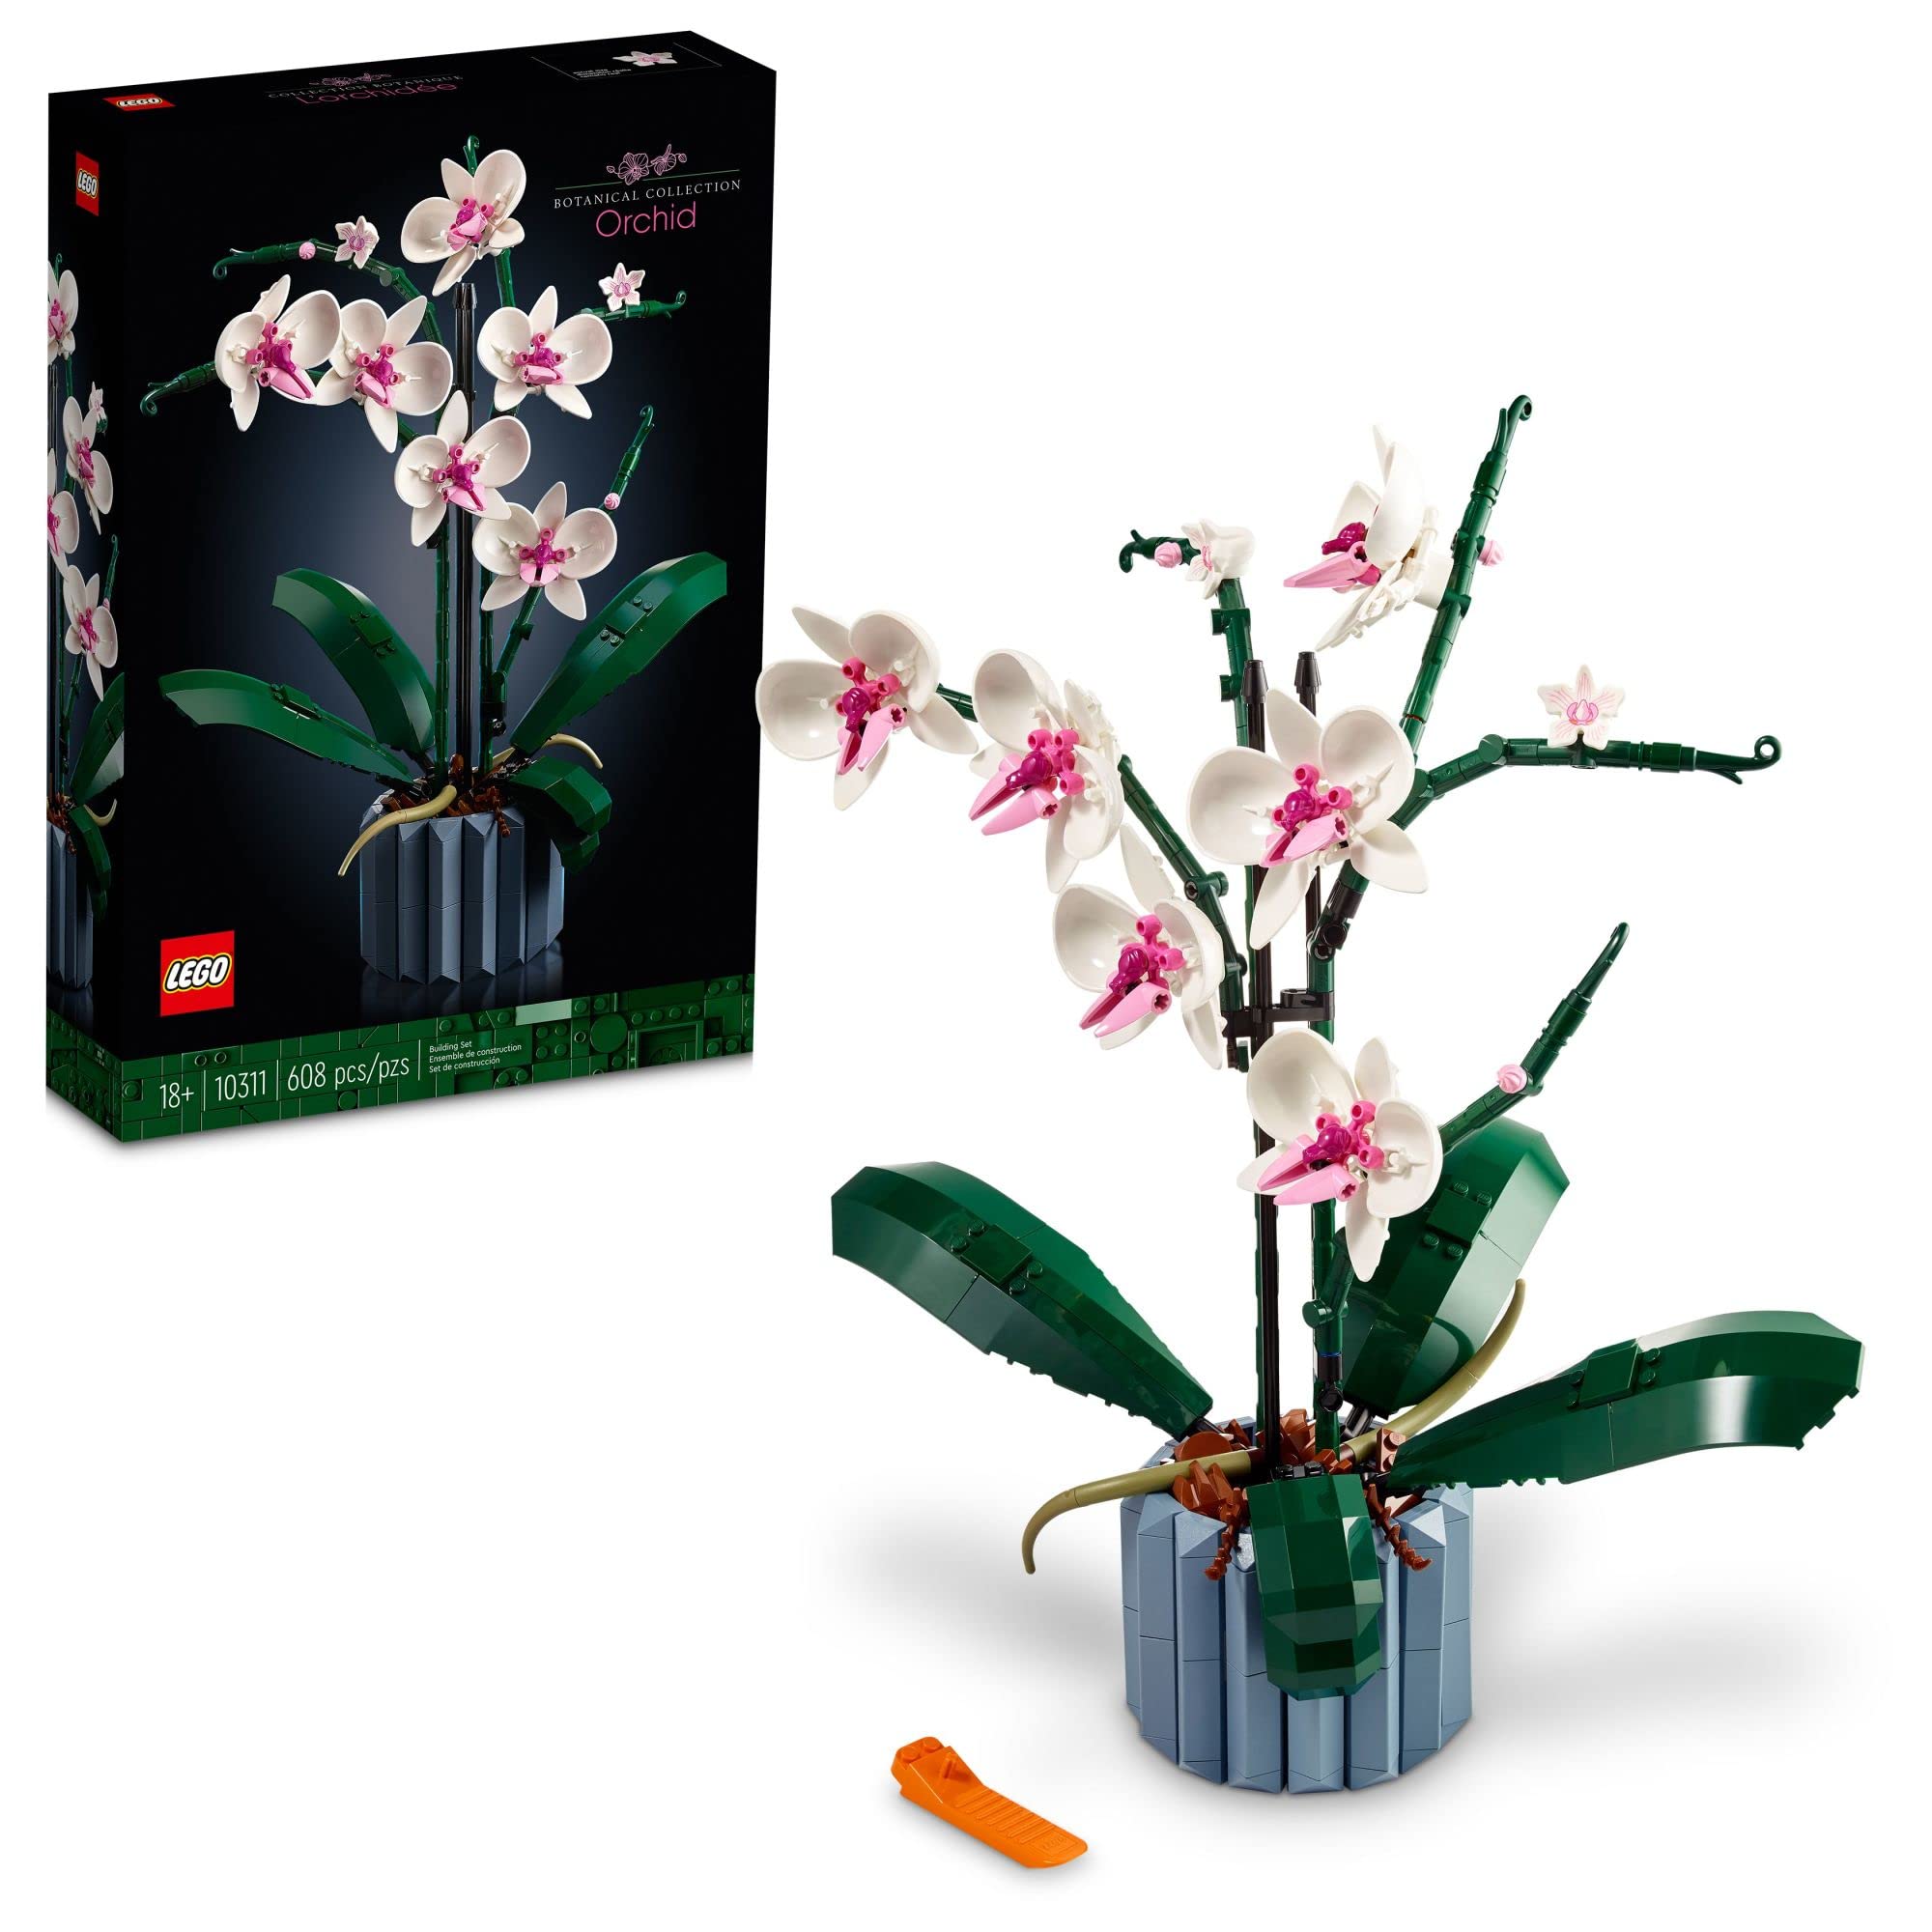 LEGO Icons Orchid Artificial Plant or Icons Bonsai Tree for $40